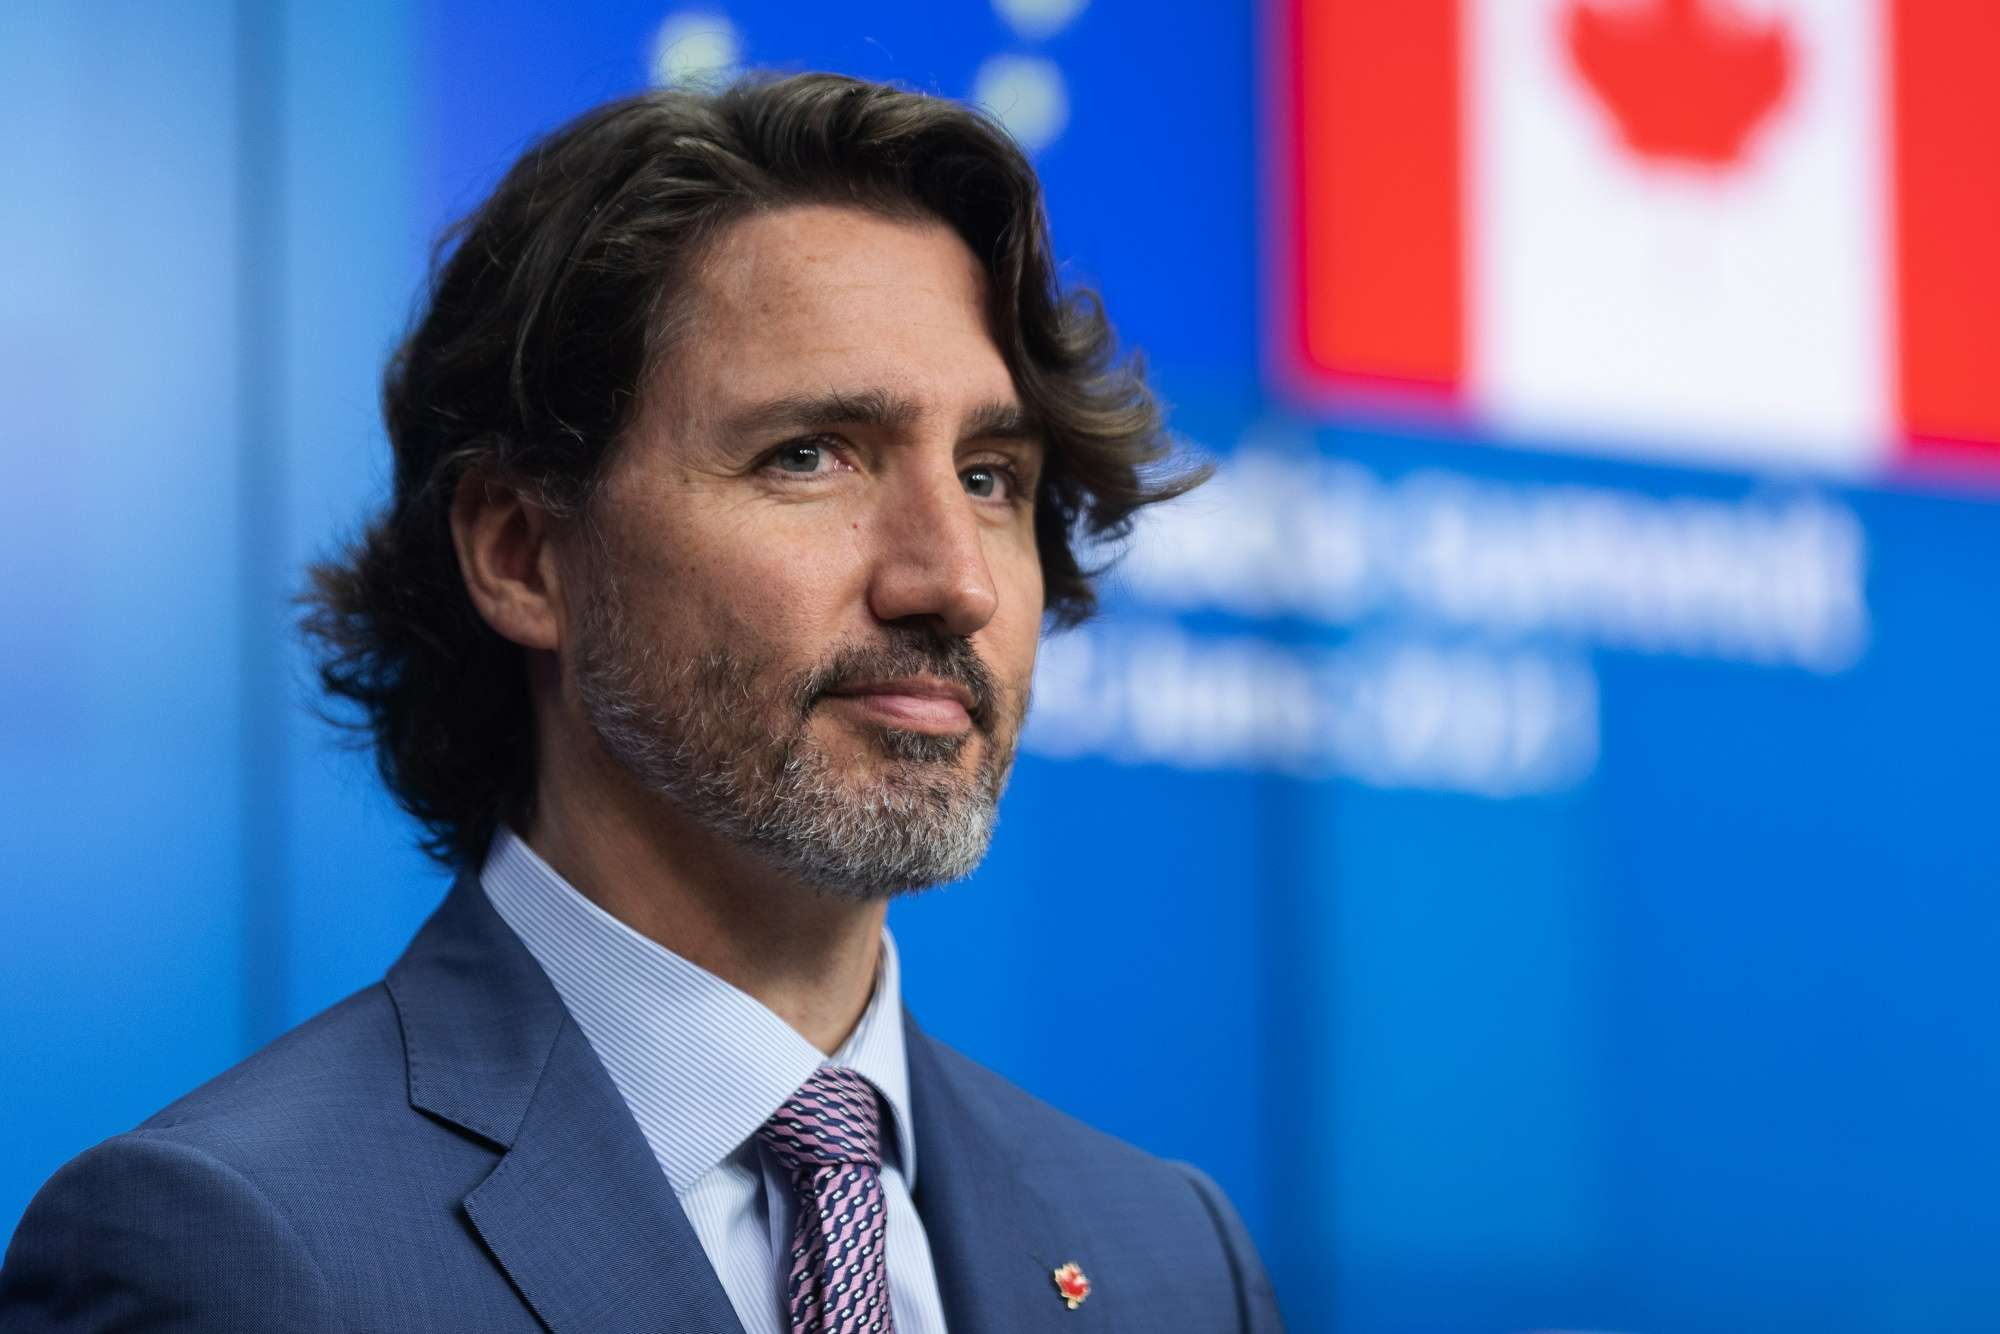 50-facts-about-justin-trudeau